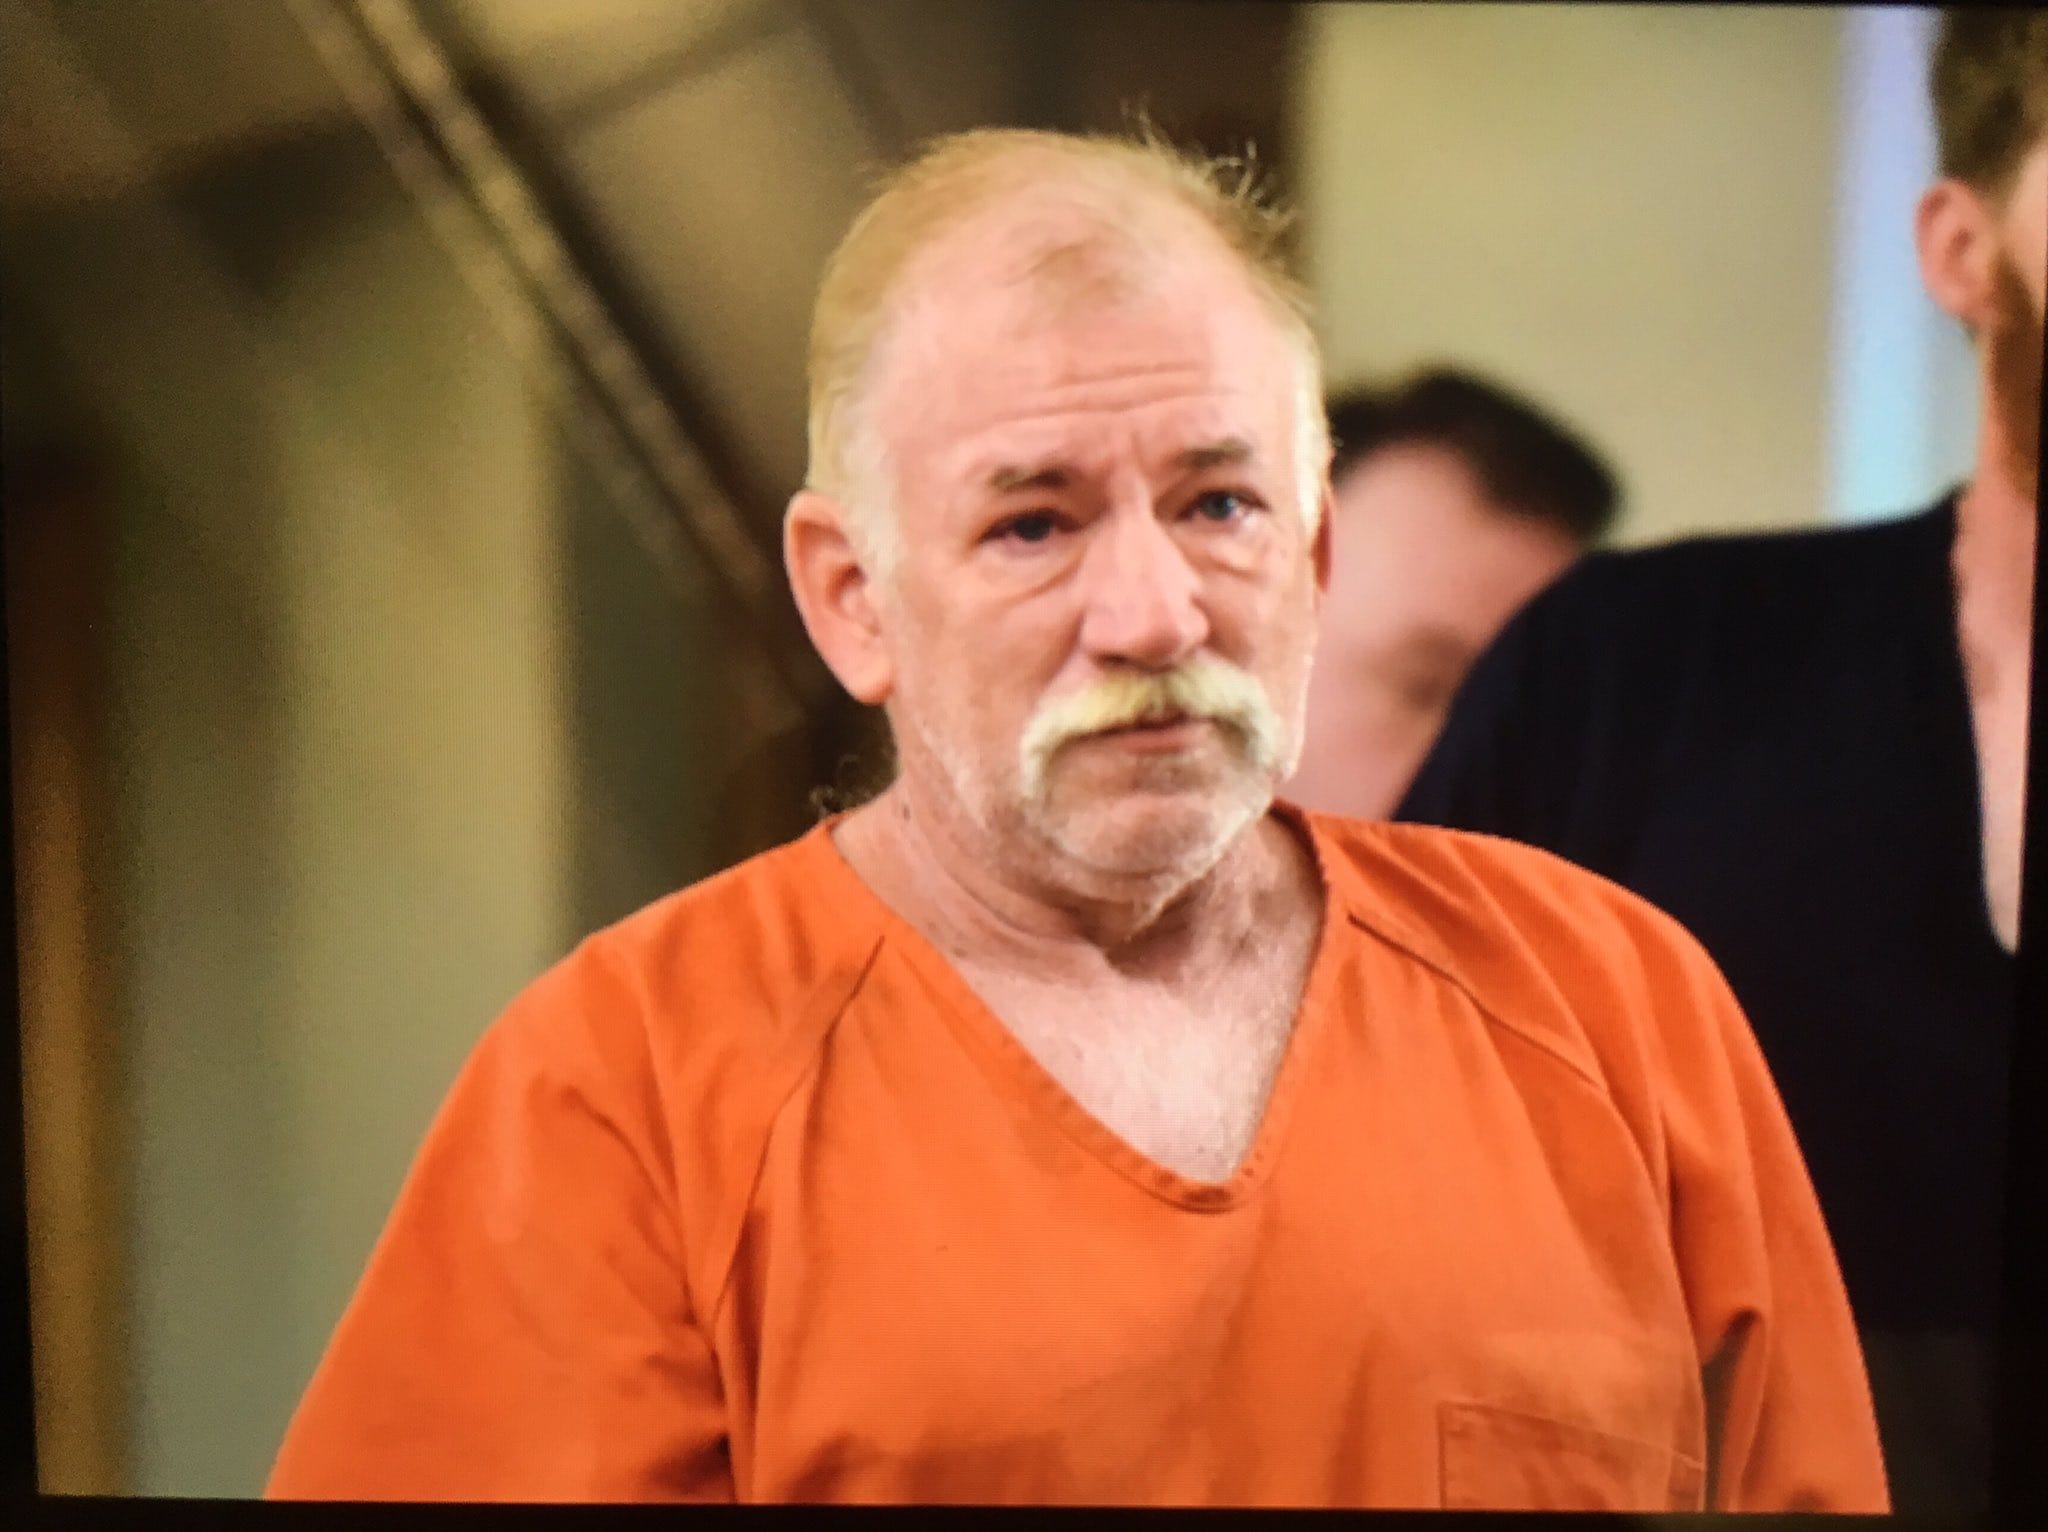 Dennis D. Bogle, 58, of Vancouver, makes a first appearance in Clark County Superior Court on Monday. Bogle stands accused of vehicular homicide for a fatal hit-and-run in east Vancouver on Thursday night.